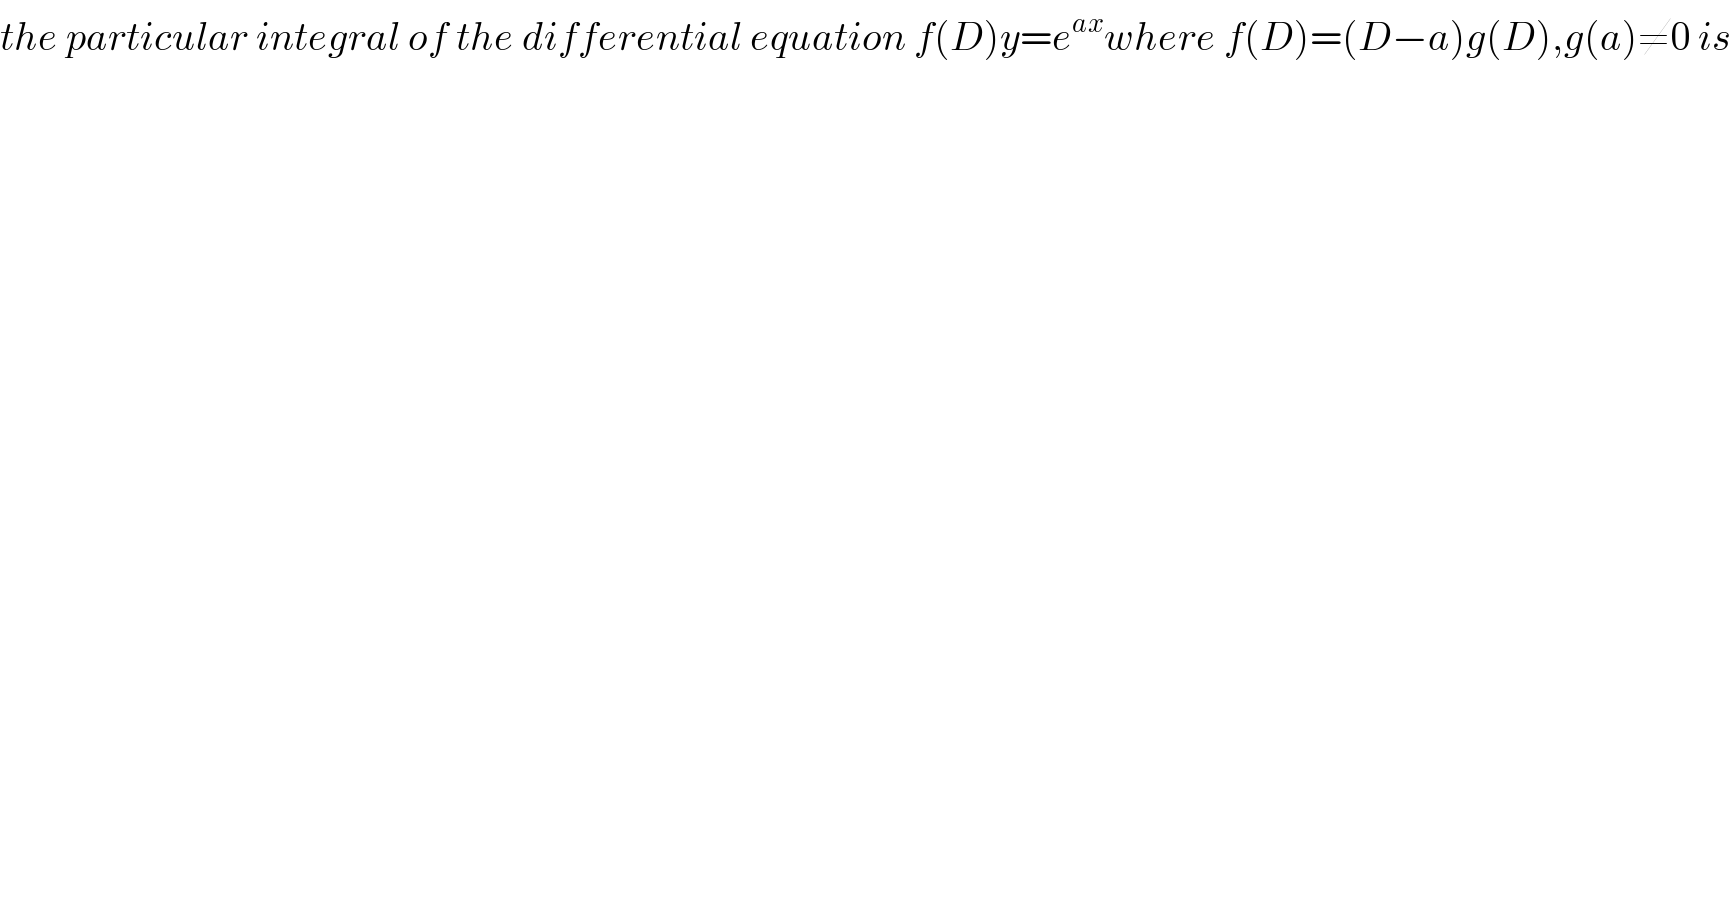 the particular integral of the differential equation f(D)y=e^(ax) where f(D)=(D−a)g(D),g(a)≠0 is  